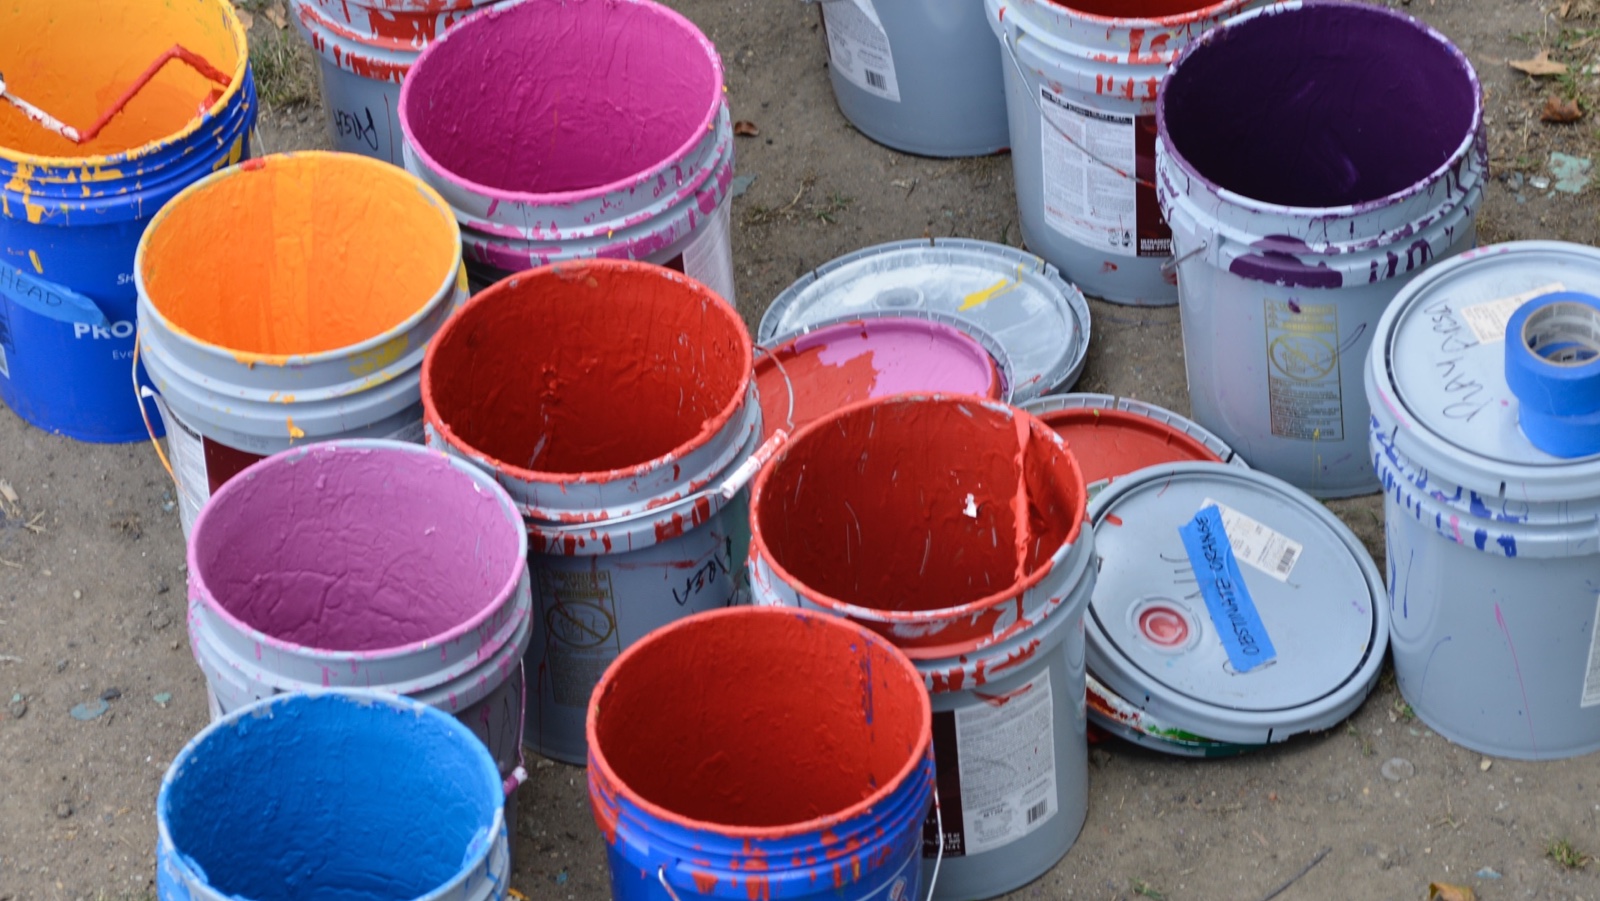 Buckets of paint used for  painting 'Rhythm & Hues' at Eakins Oval. (Bastiaan Slabbers for NewsWorks)